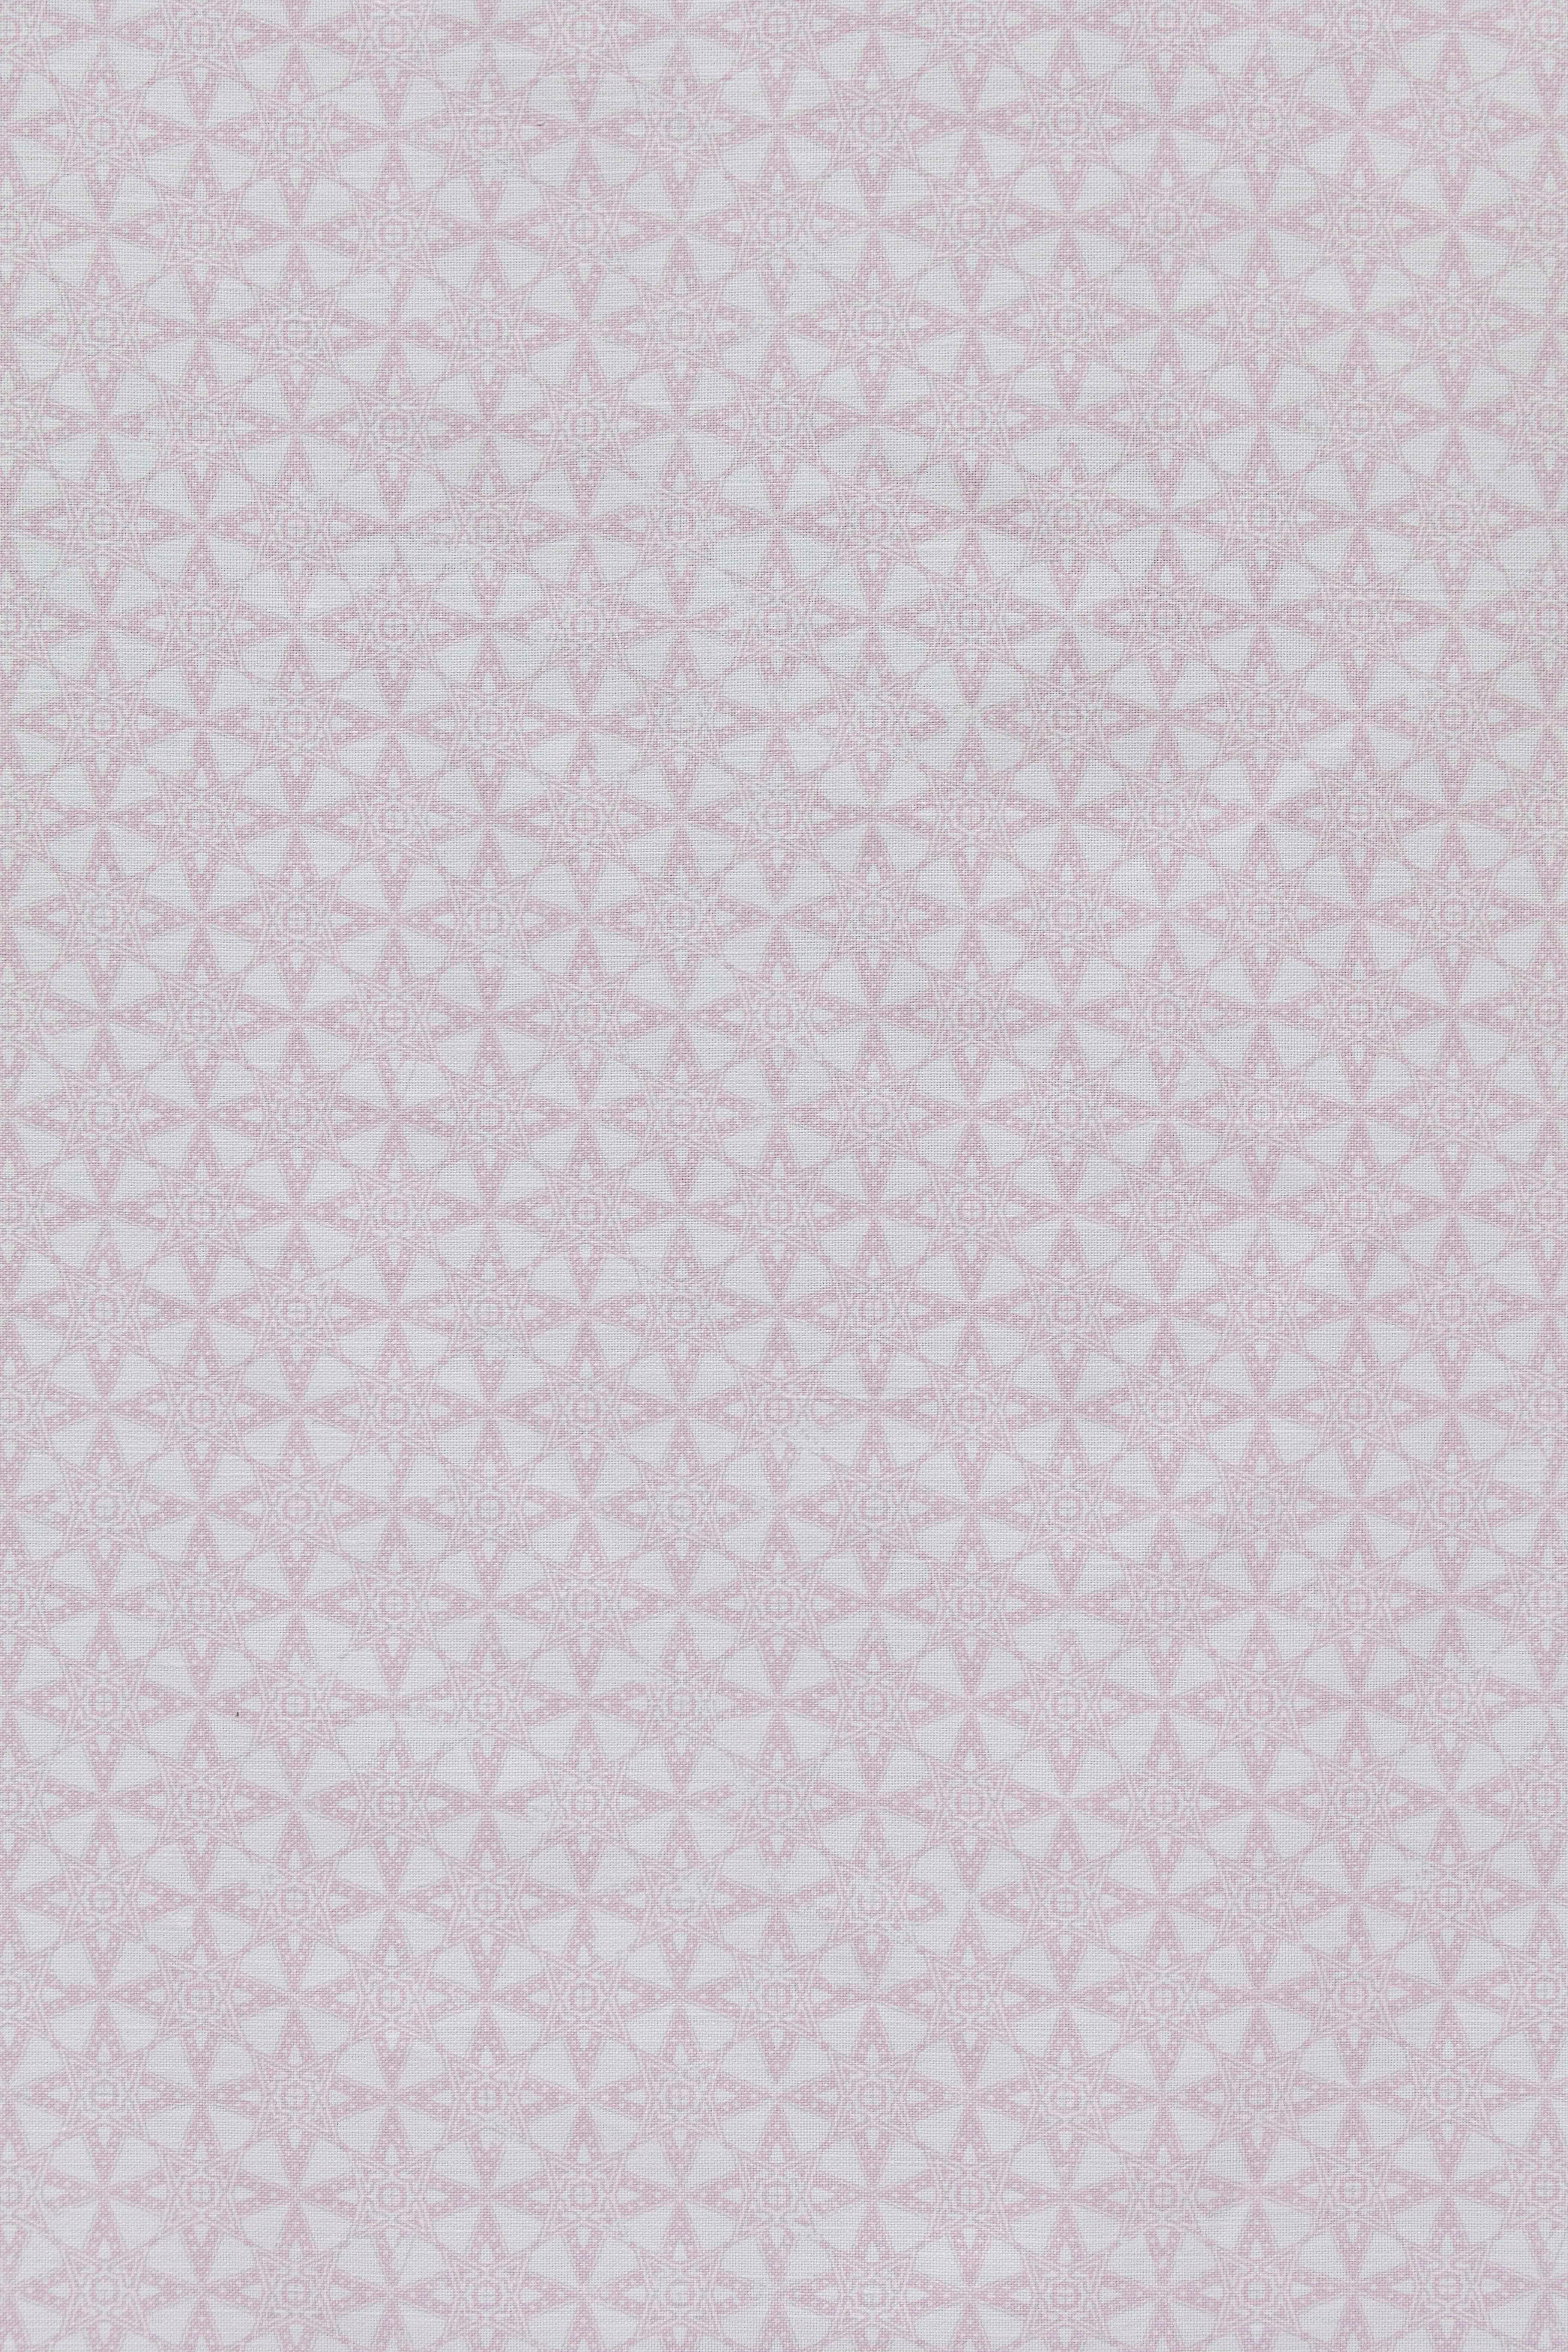 Color: Pink (also available in Sage)
Trim width: 142cm / 55.90 inches
Pattern repeat: Straight Match
Match length: 45.7cm / 18 inches
Composition: 58% linen 42% cotton
Usage: General domestic upholstery

Sold per metre.

The well-worn floor